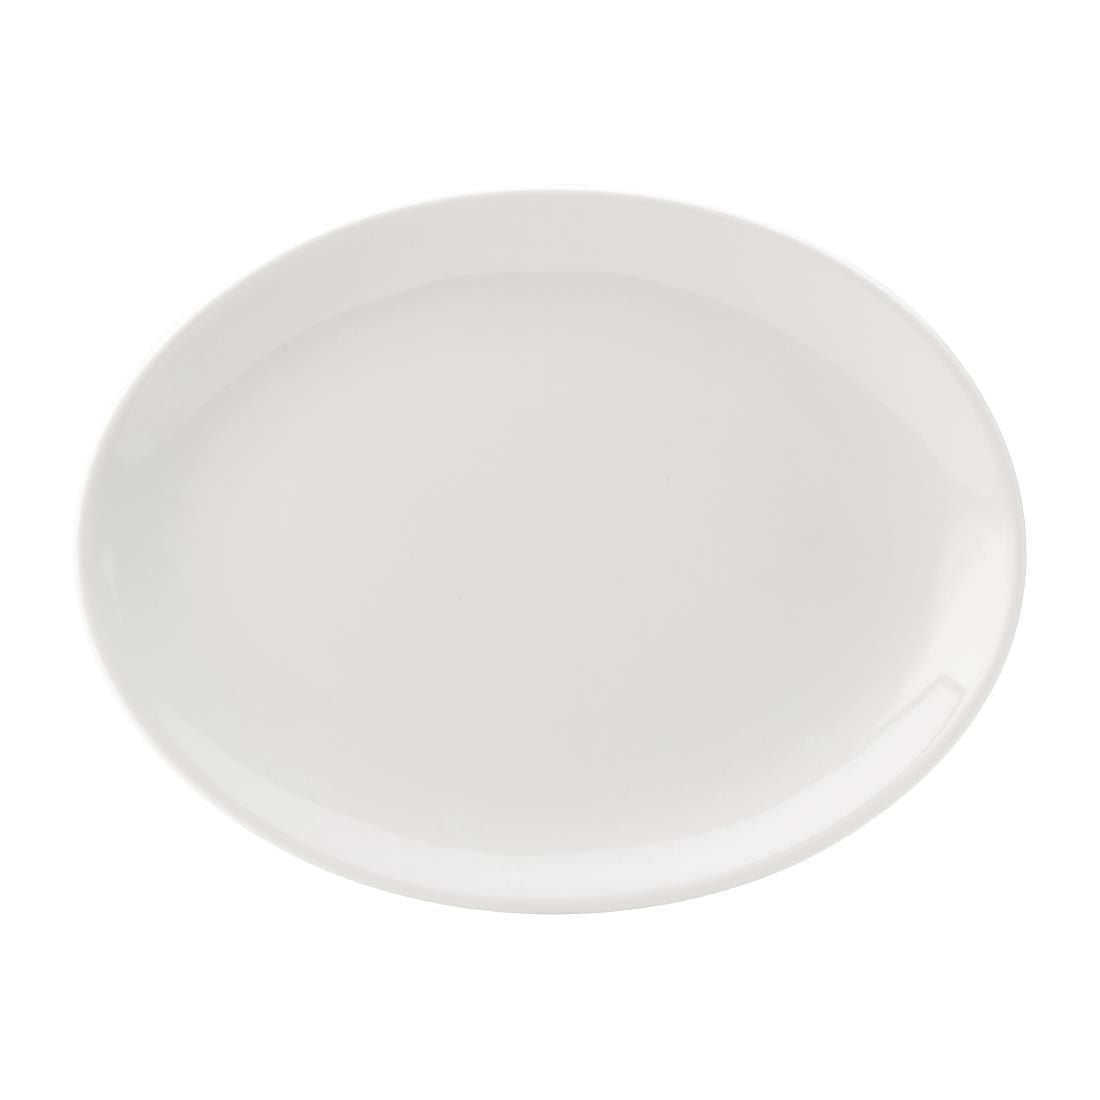 DY323 Utopia Titan Oval Plates White 210mm (Pack of 24)